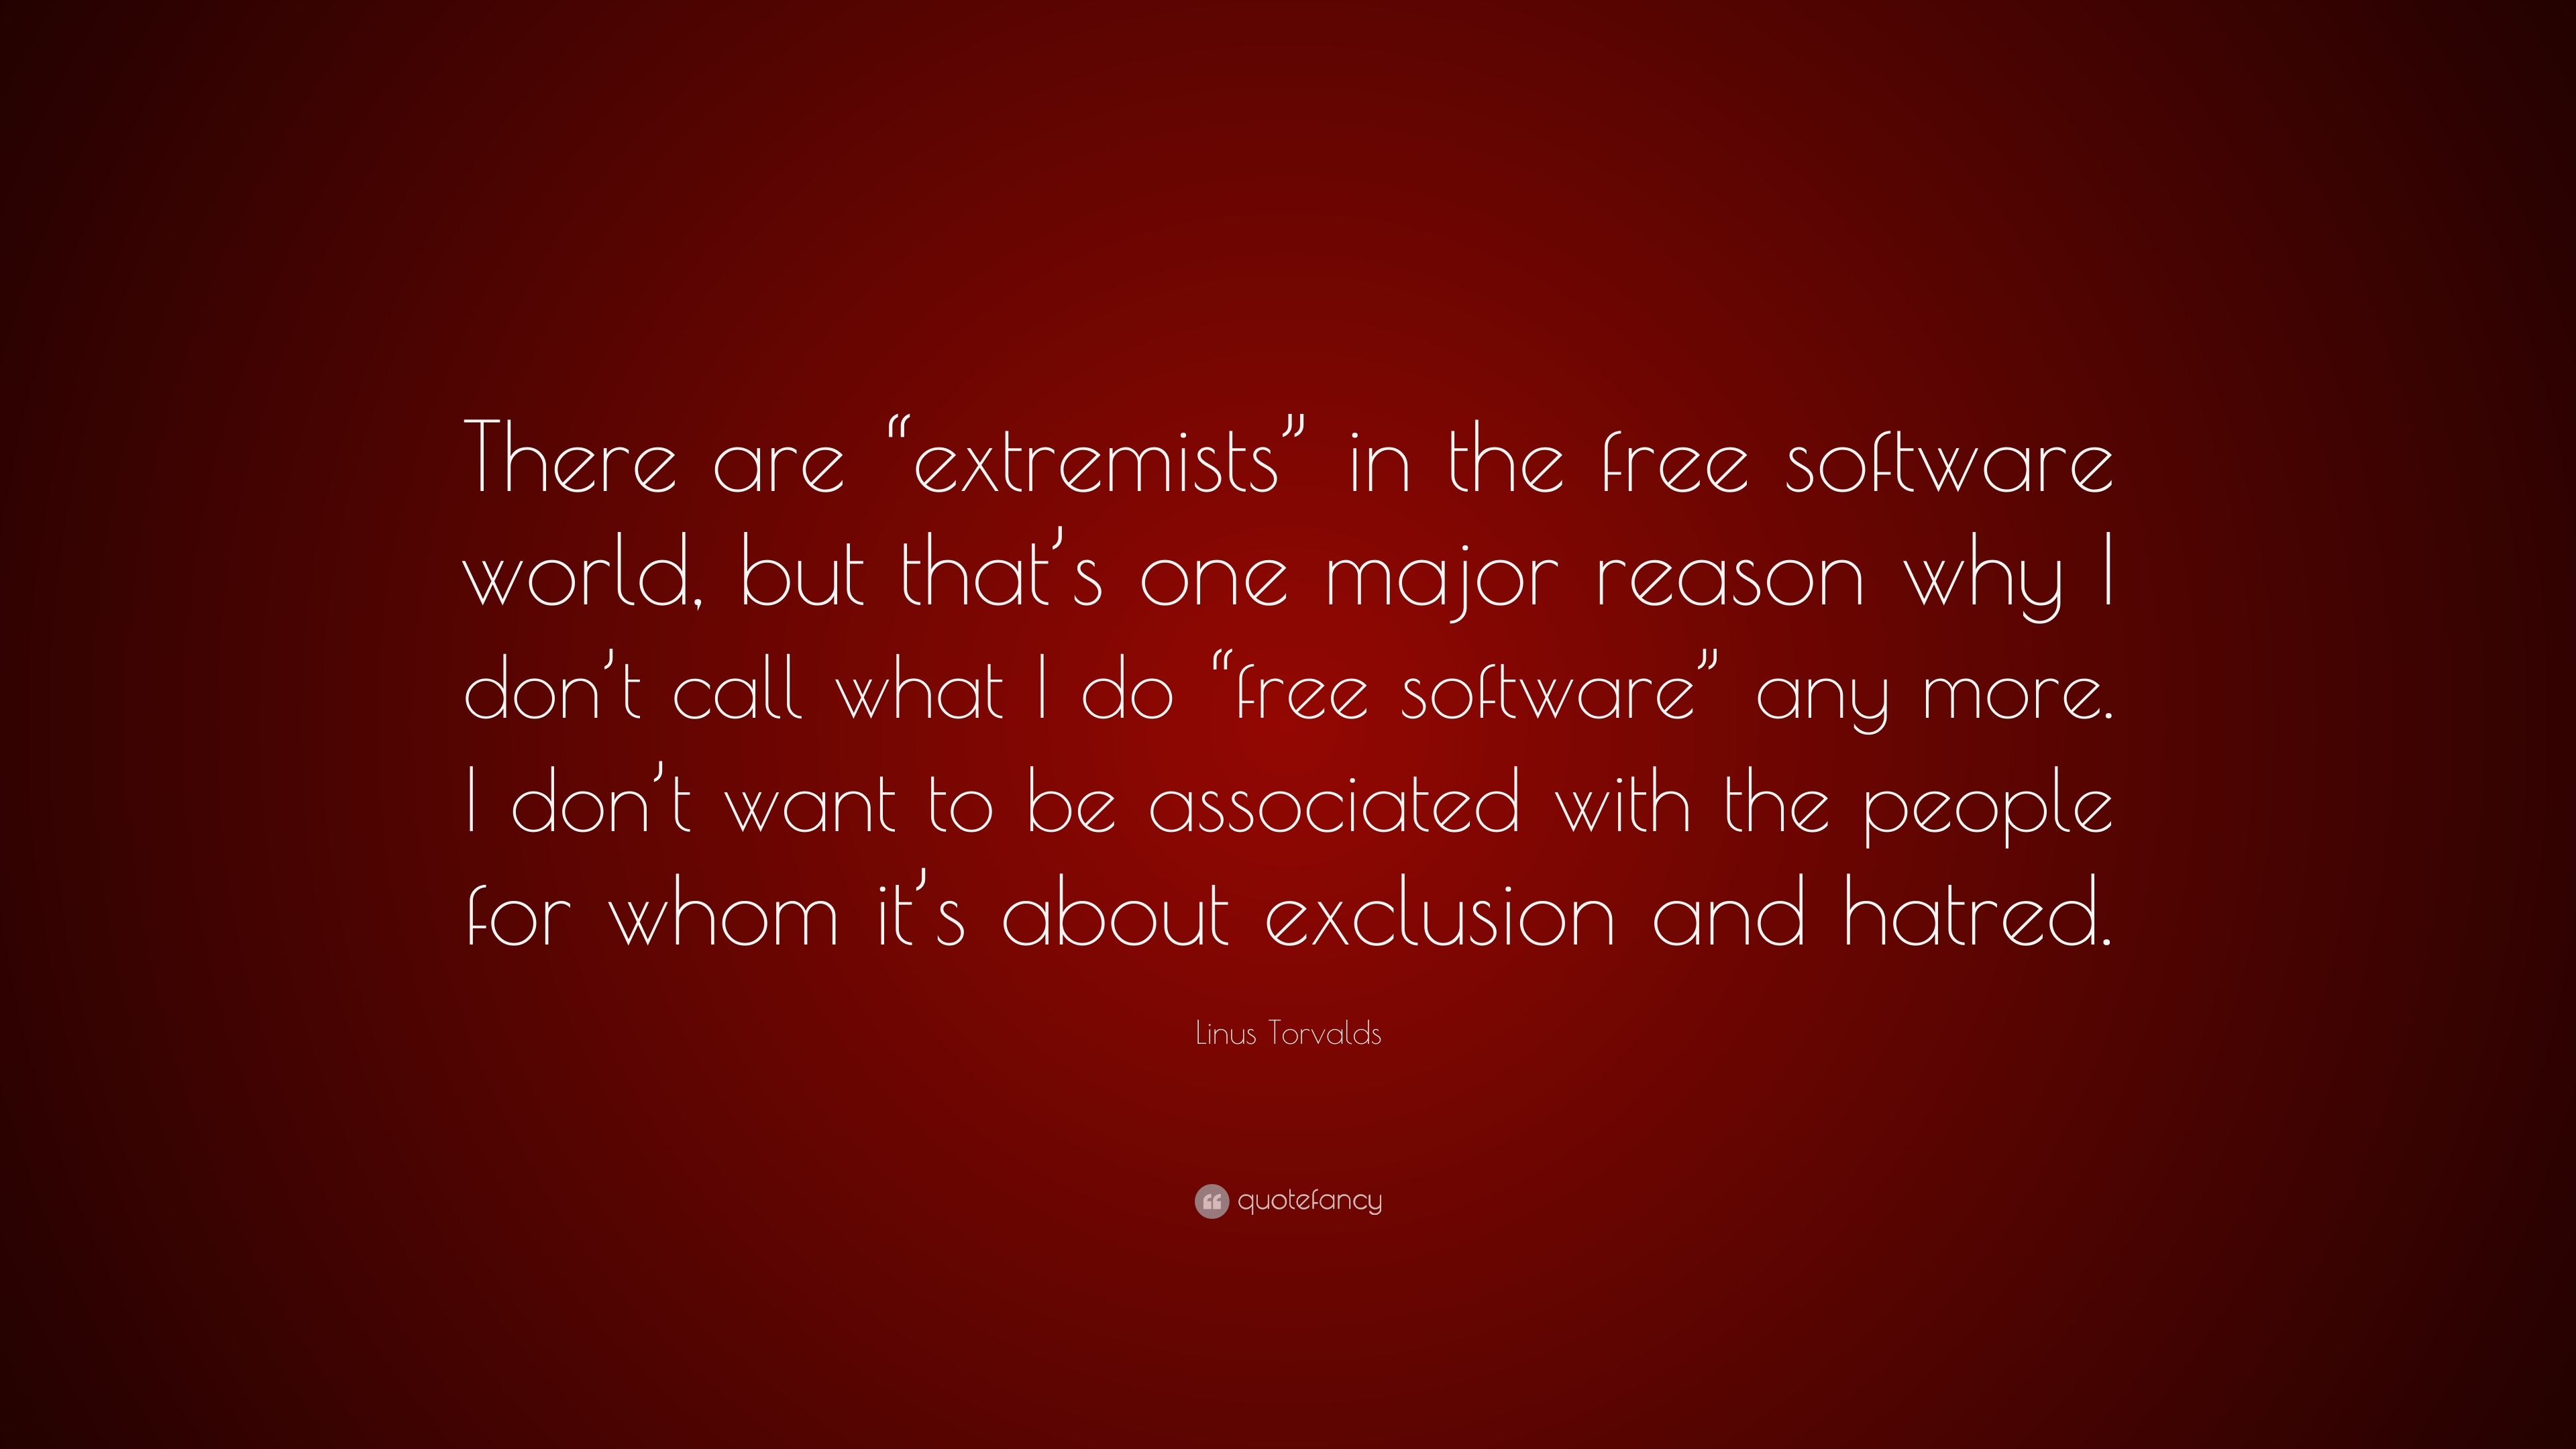 Linus Torvalds Quote: “There are “extremists” in the free software ...